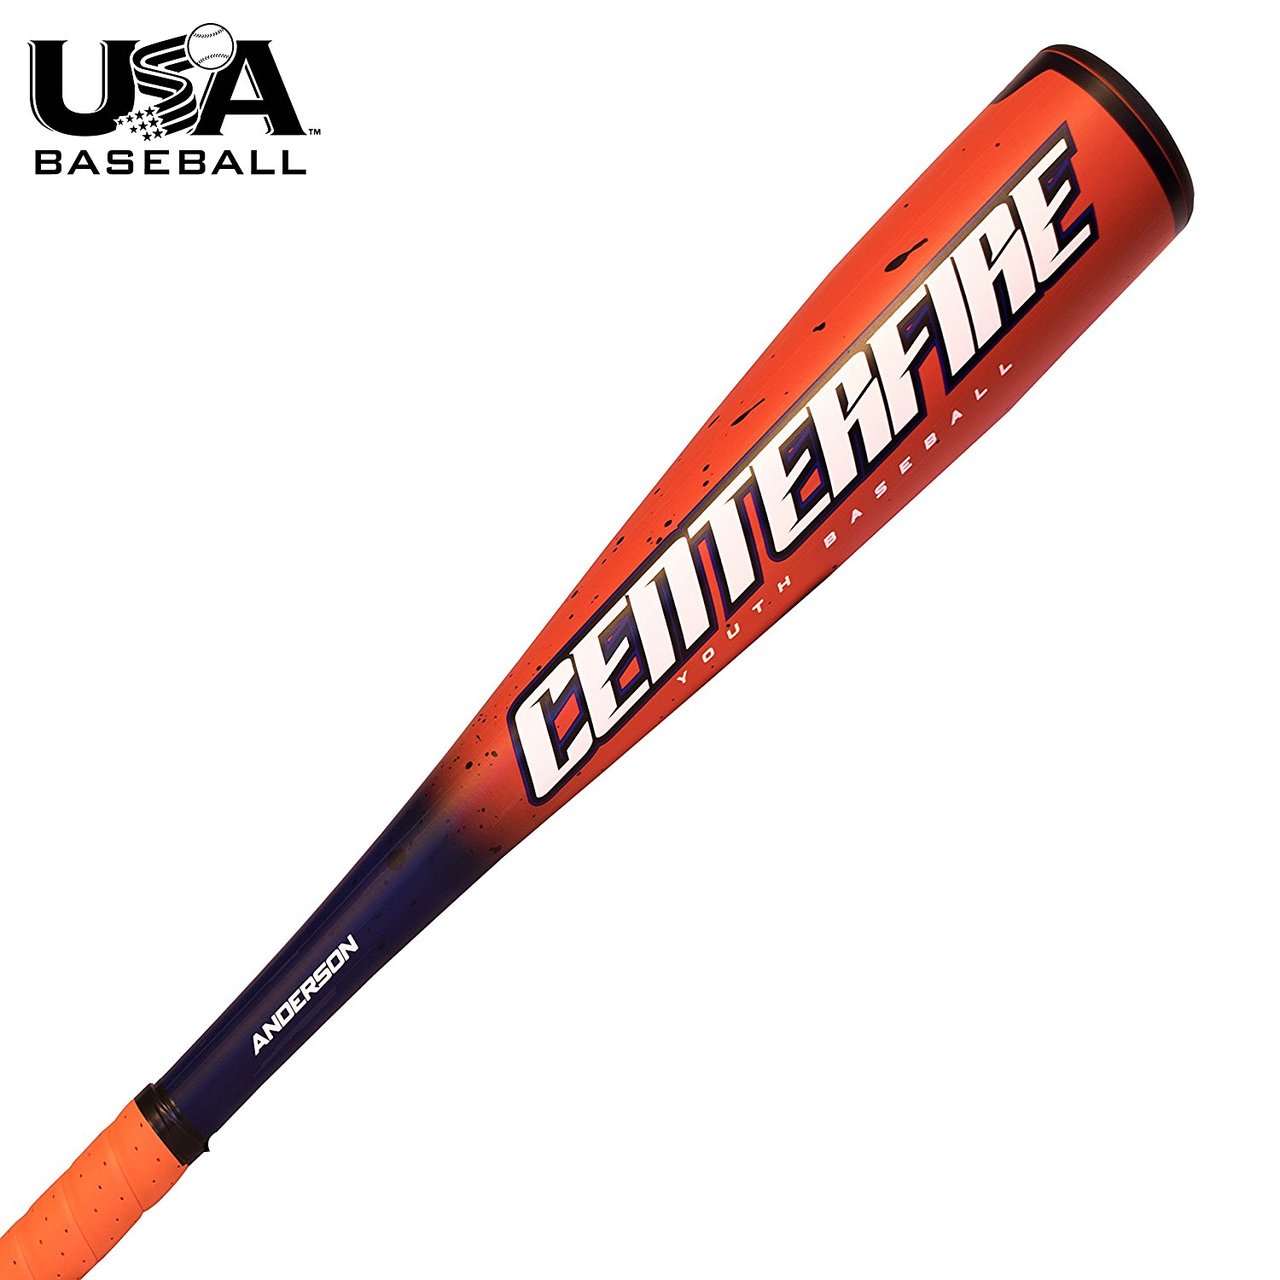 anderson-2018-centerfire-11-youth-usa-baseball-bat-28-inch-17-oz 015033-2817 Anderson 874147008539 2 5/8” Barrel -11 Drop Weight Balanced swing weight for more